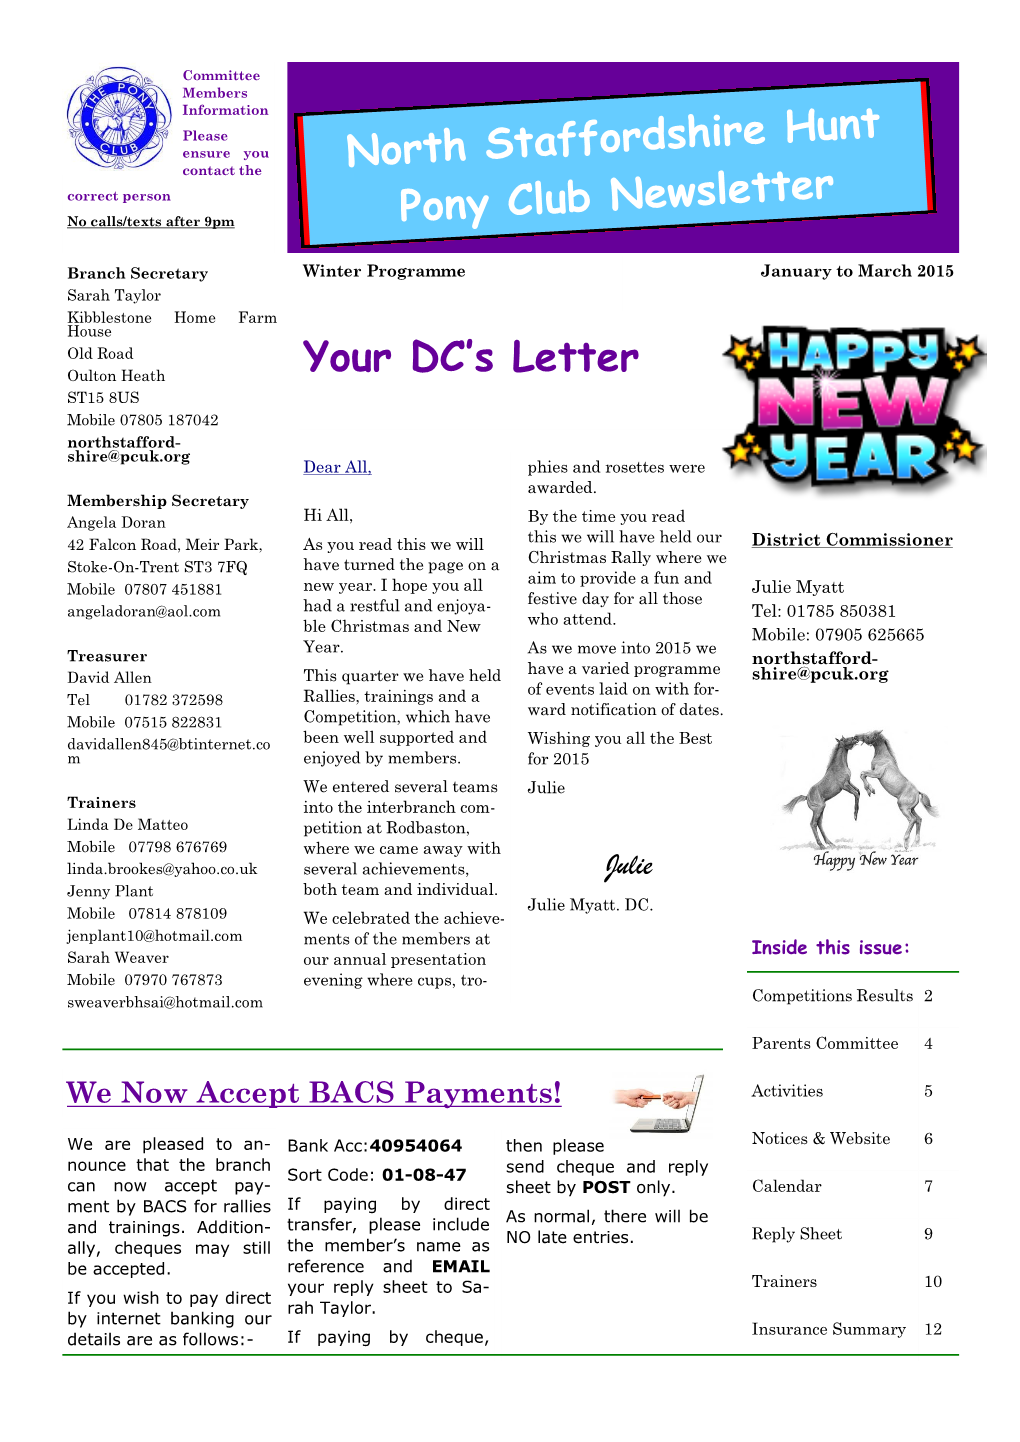 Your DC's Letter North Staffordshire Hunt Pony Club Newsletter